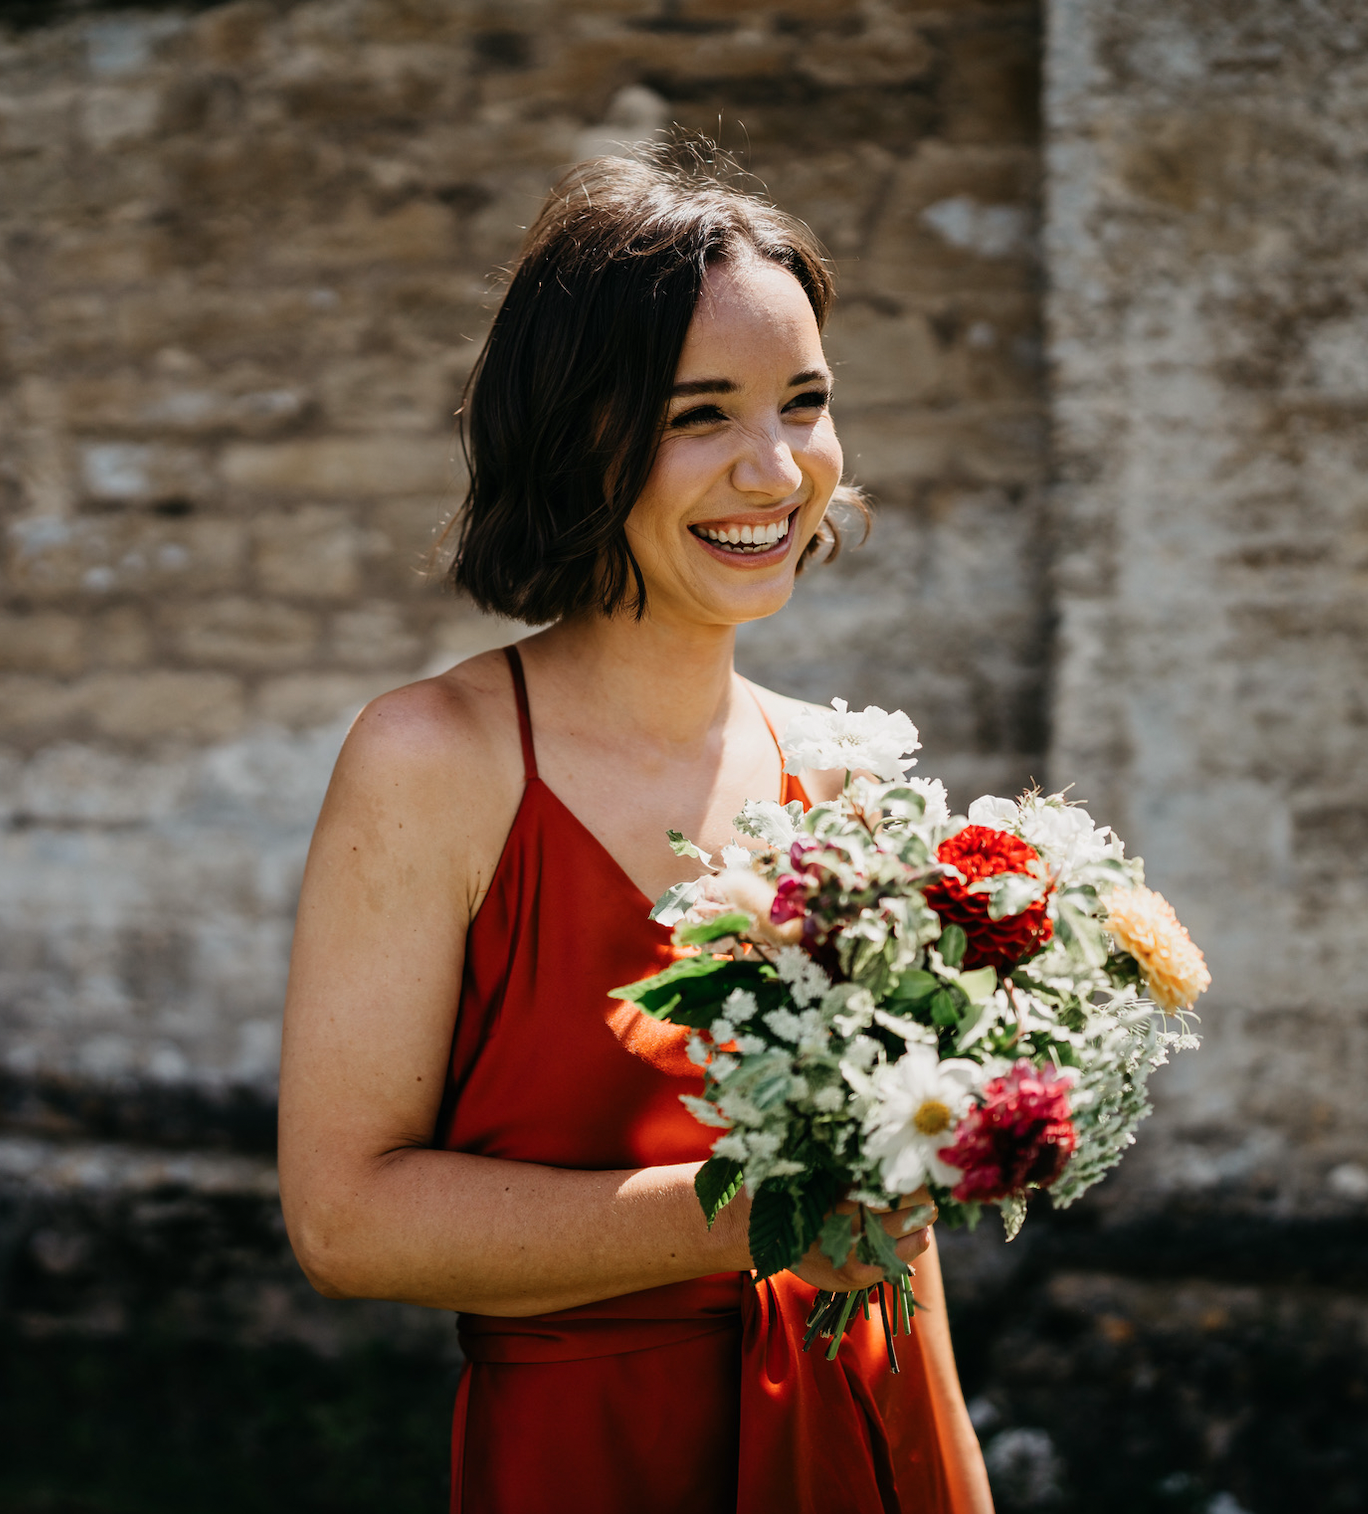 A July bouquet for a bridesmaid - Photo by Ed Godden